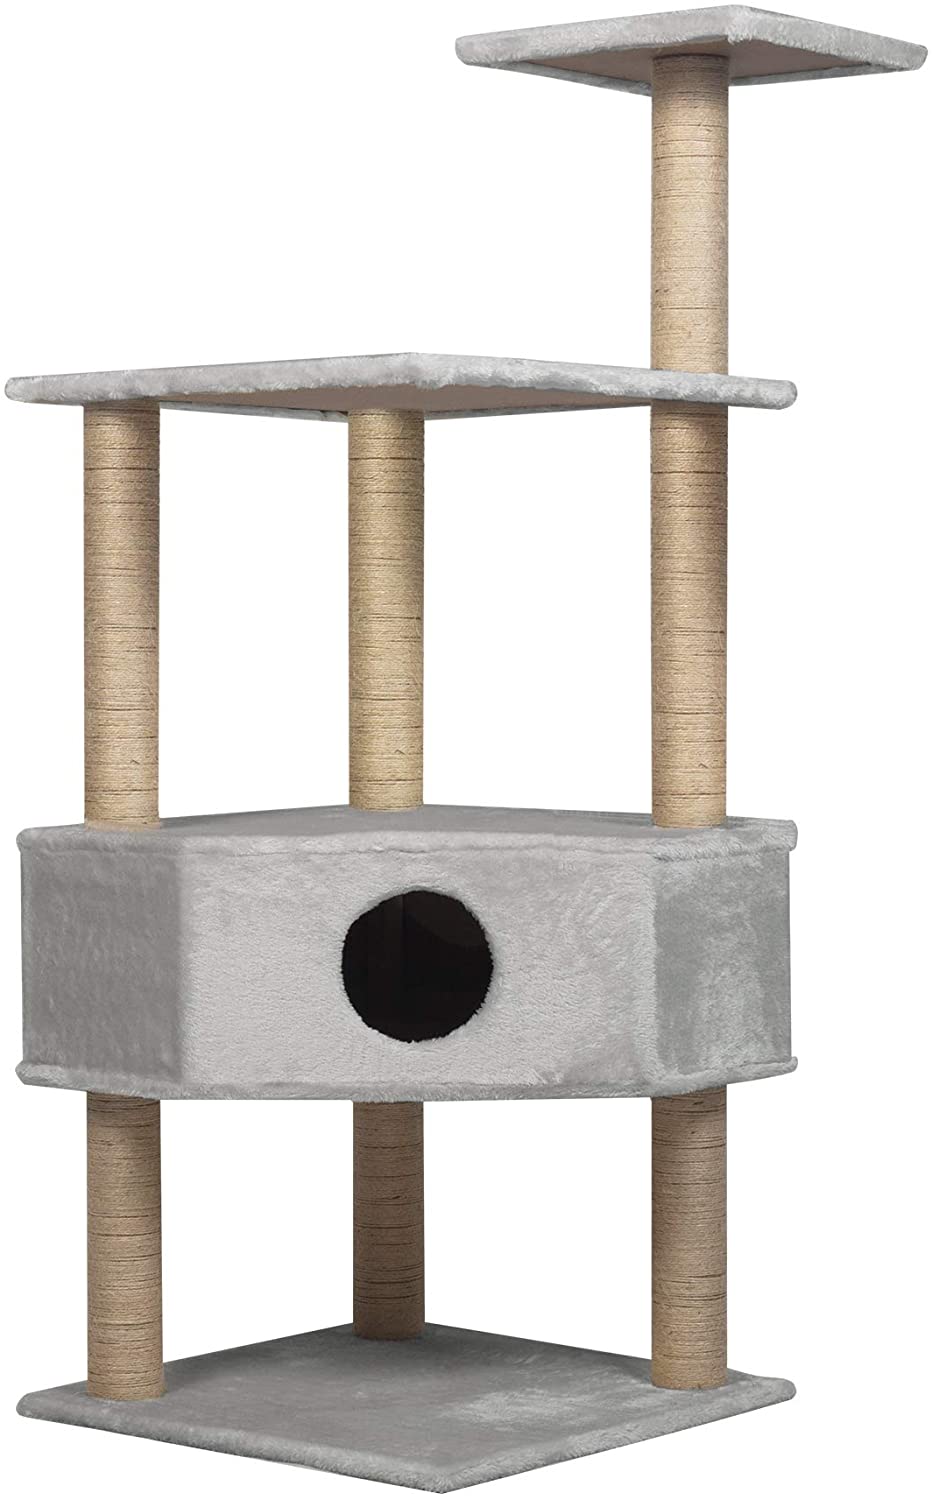 Condo Pet Furniture Multi-Level Kitten Activity Tower Play House with Sisal Scratching Posts Perch (Style 8)